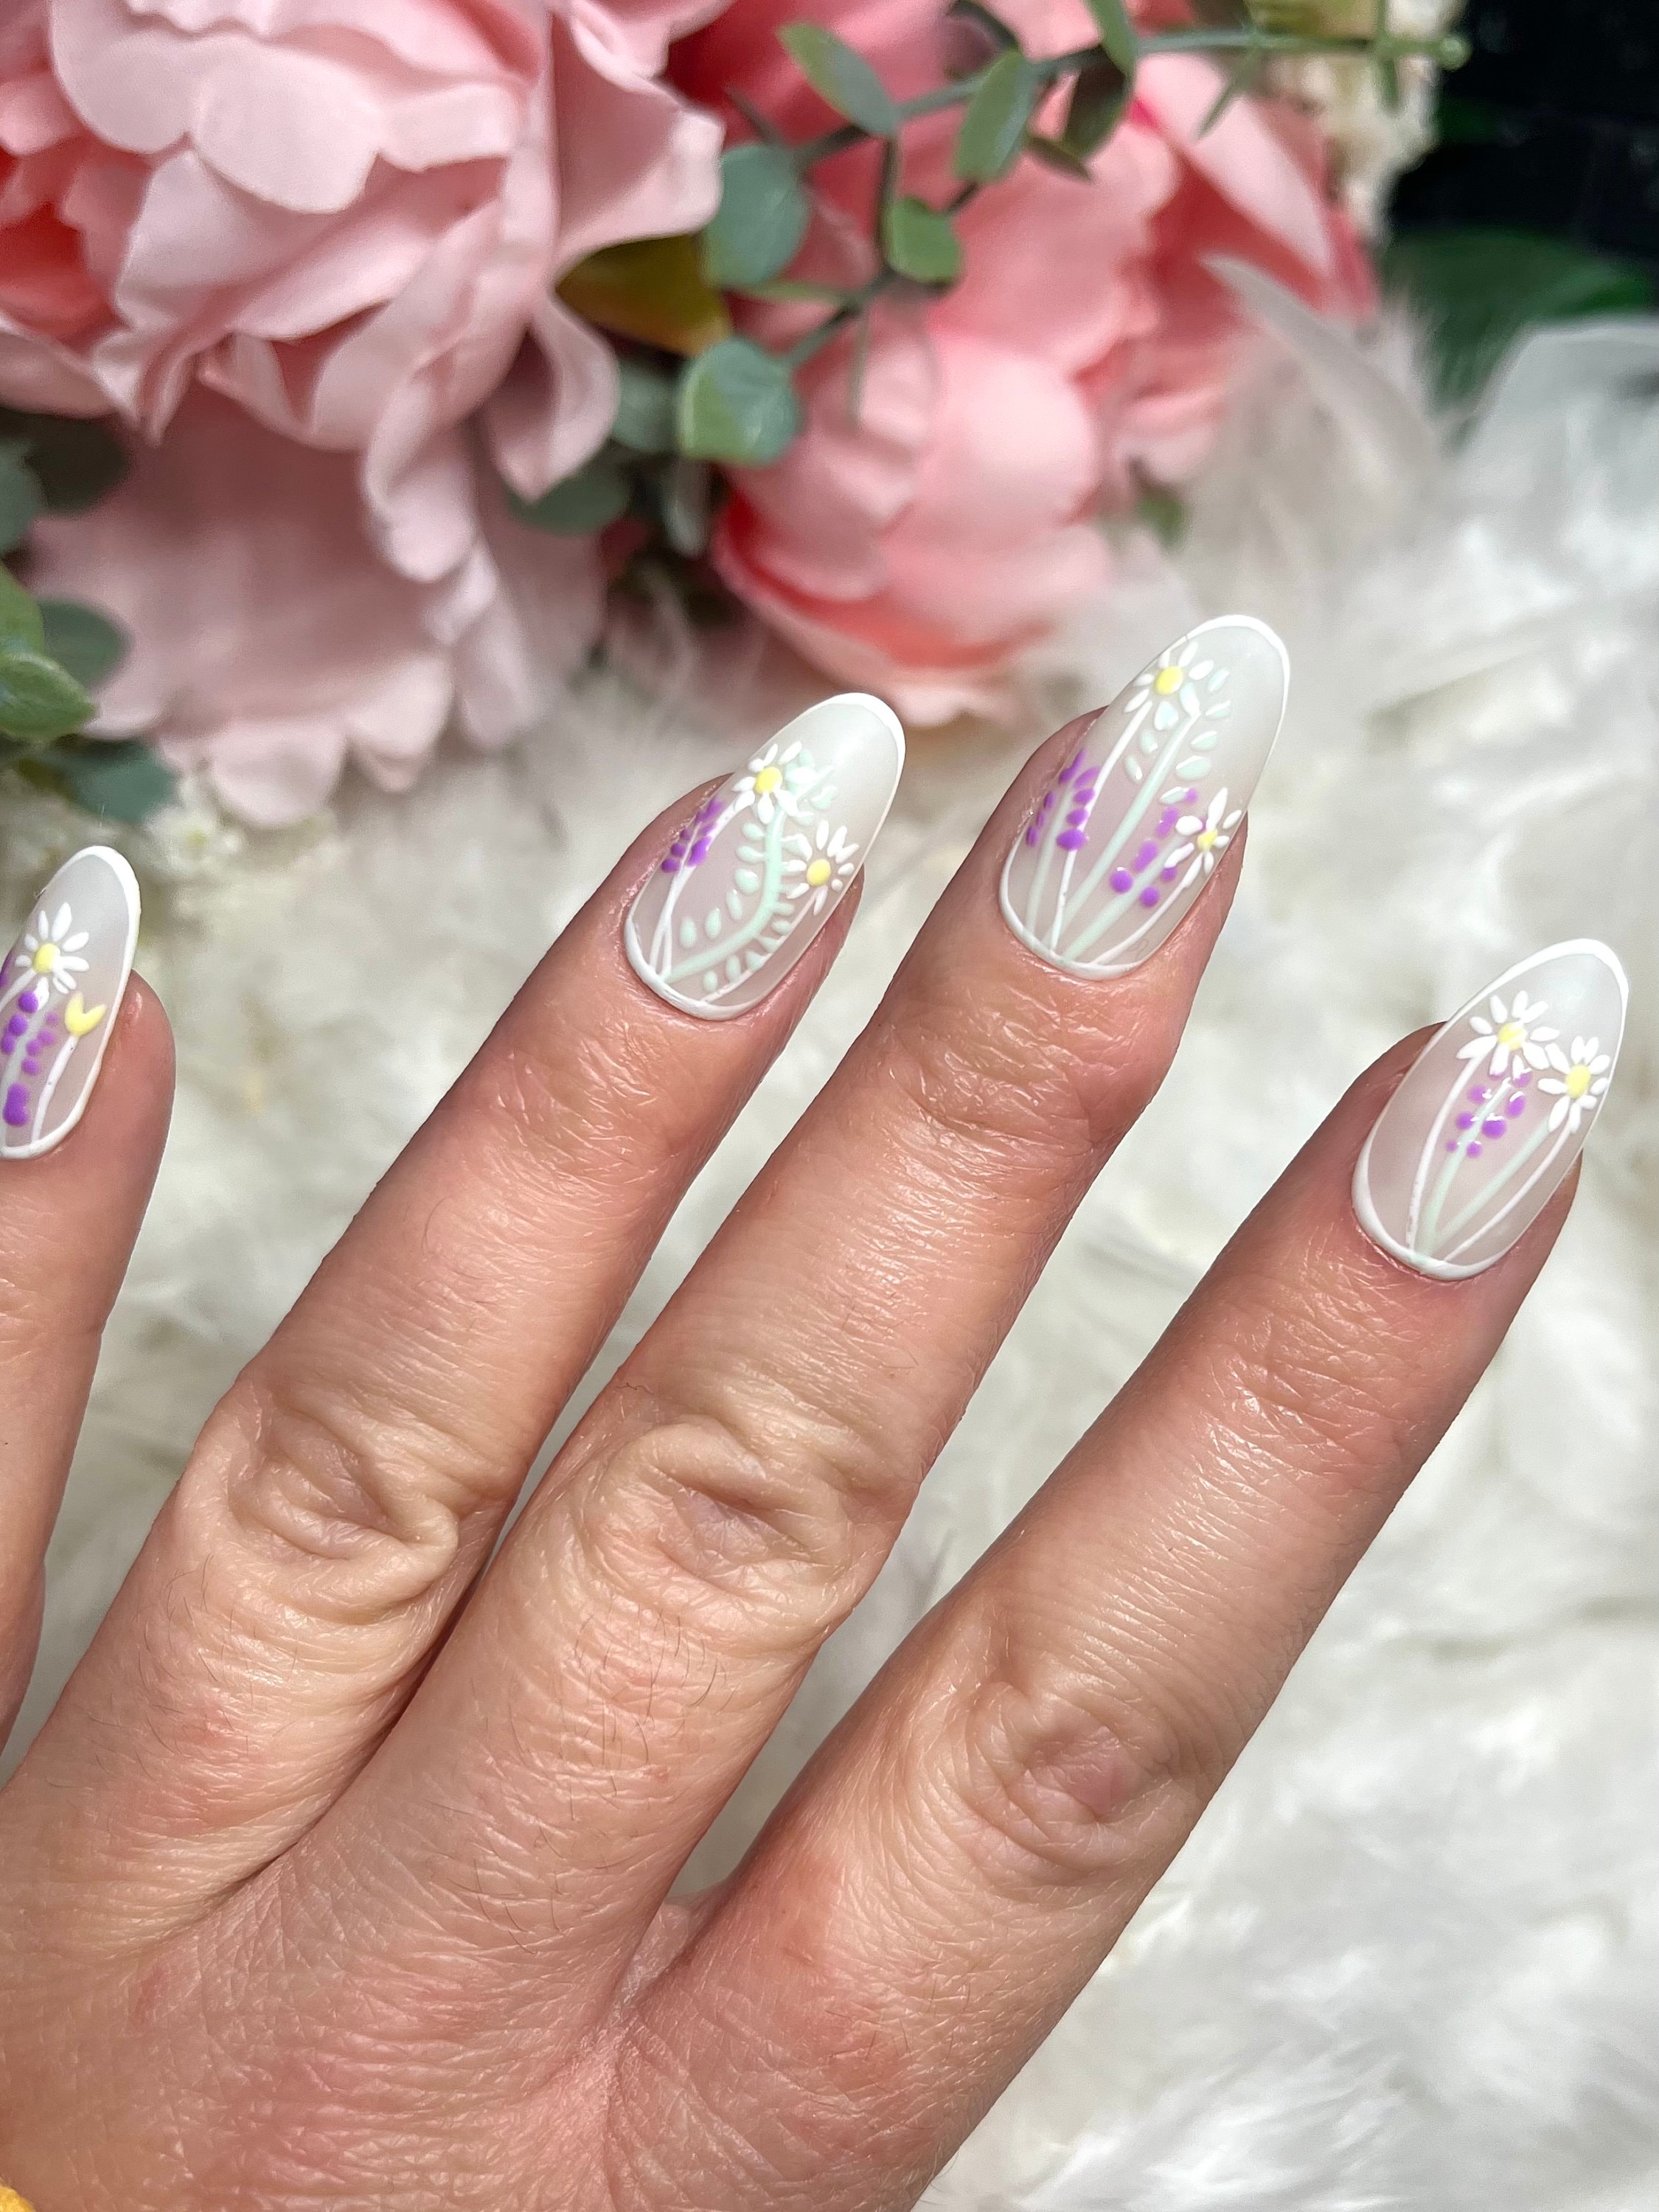 Nail Class in Spanish – Pretty Layla's nails supplies